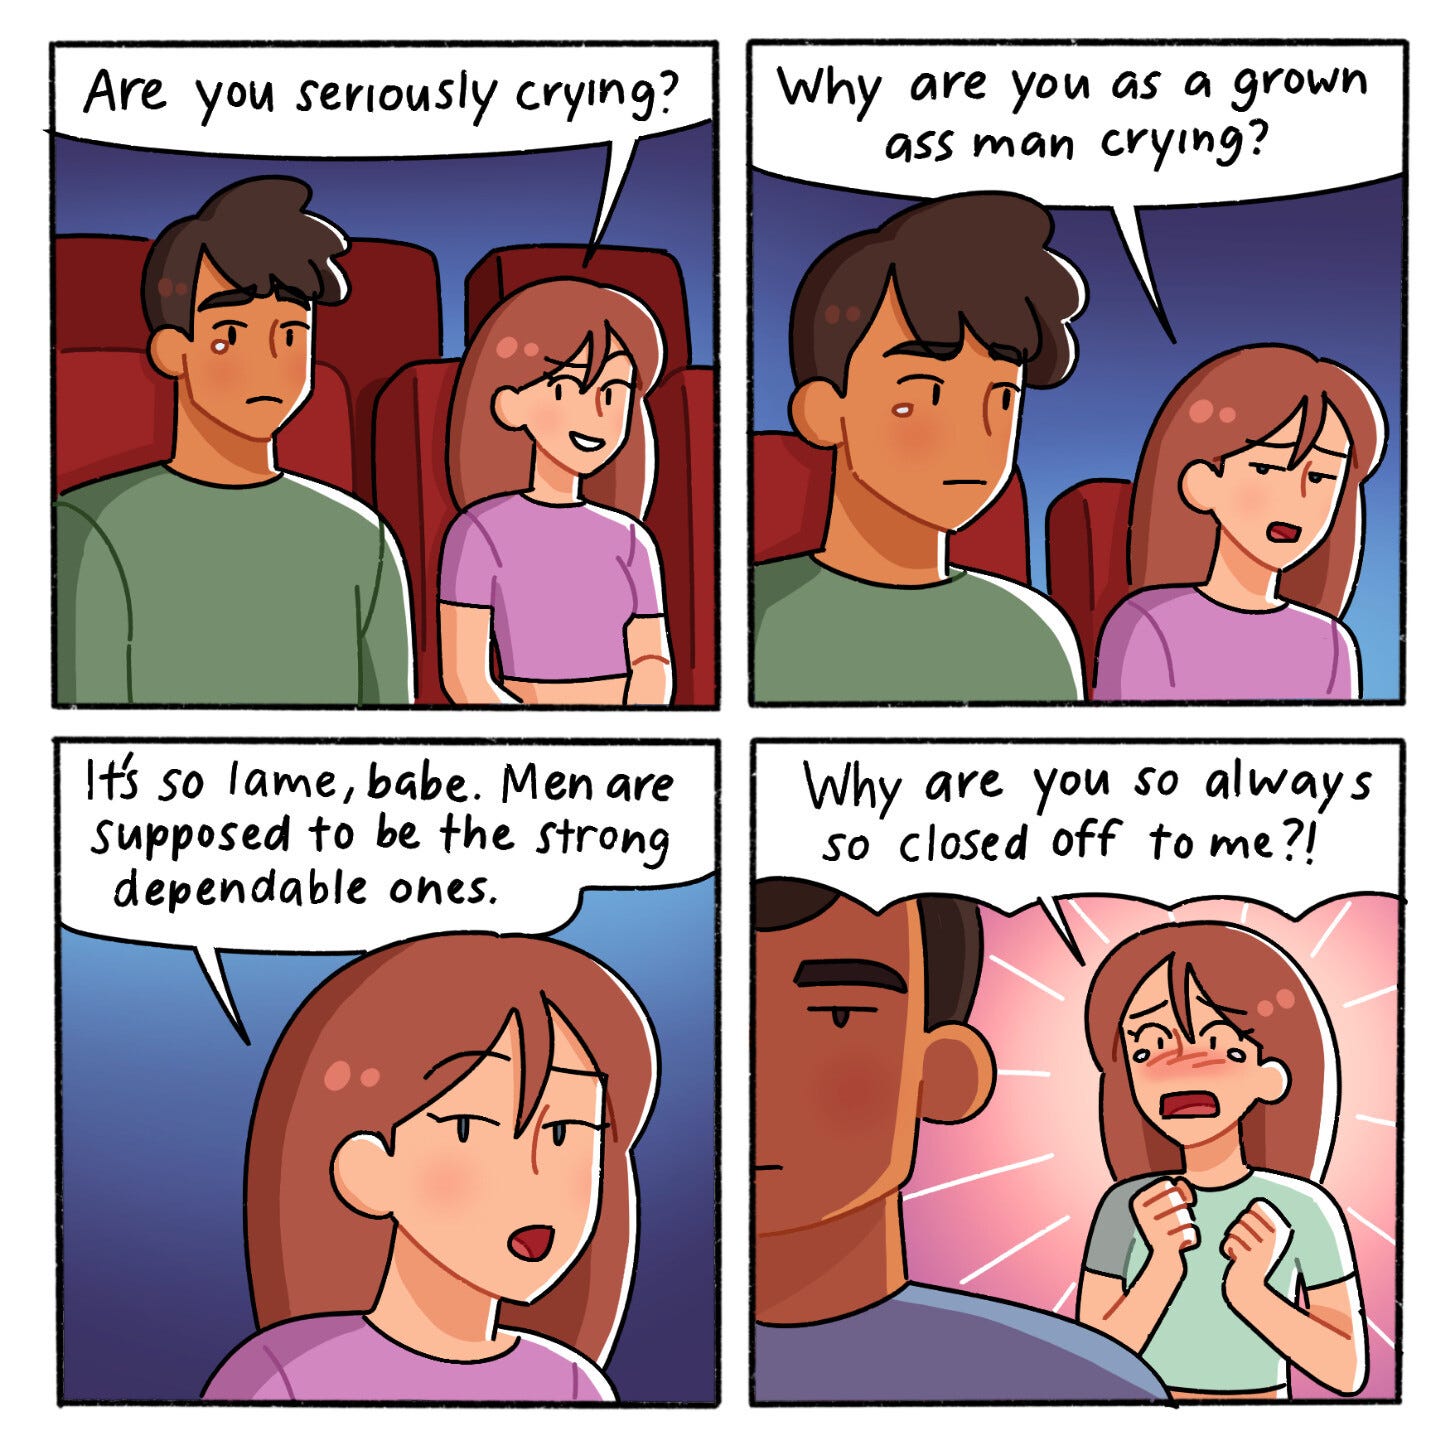 A four-panel web comic depicting a man and a woman sitting in a theater.  First panel: The woman looks at the man and asks, “Are you seriously crying?”  Second panel: The woman continues, “Why are you as a grown ass man crying?”  Third panel: The woman says, “It’s so lame, babe. Men are supposed to be the strong and dependable ones.”  Fourth panel: The man has turned away from the woman. He has a disaffected expression on his face. The woman, newly distressed, asks, “Why are you so [sic] always so closed off to me?!”